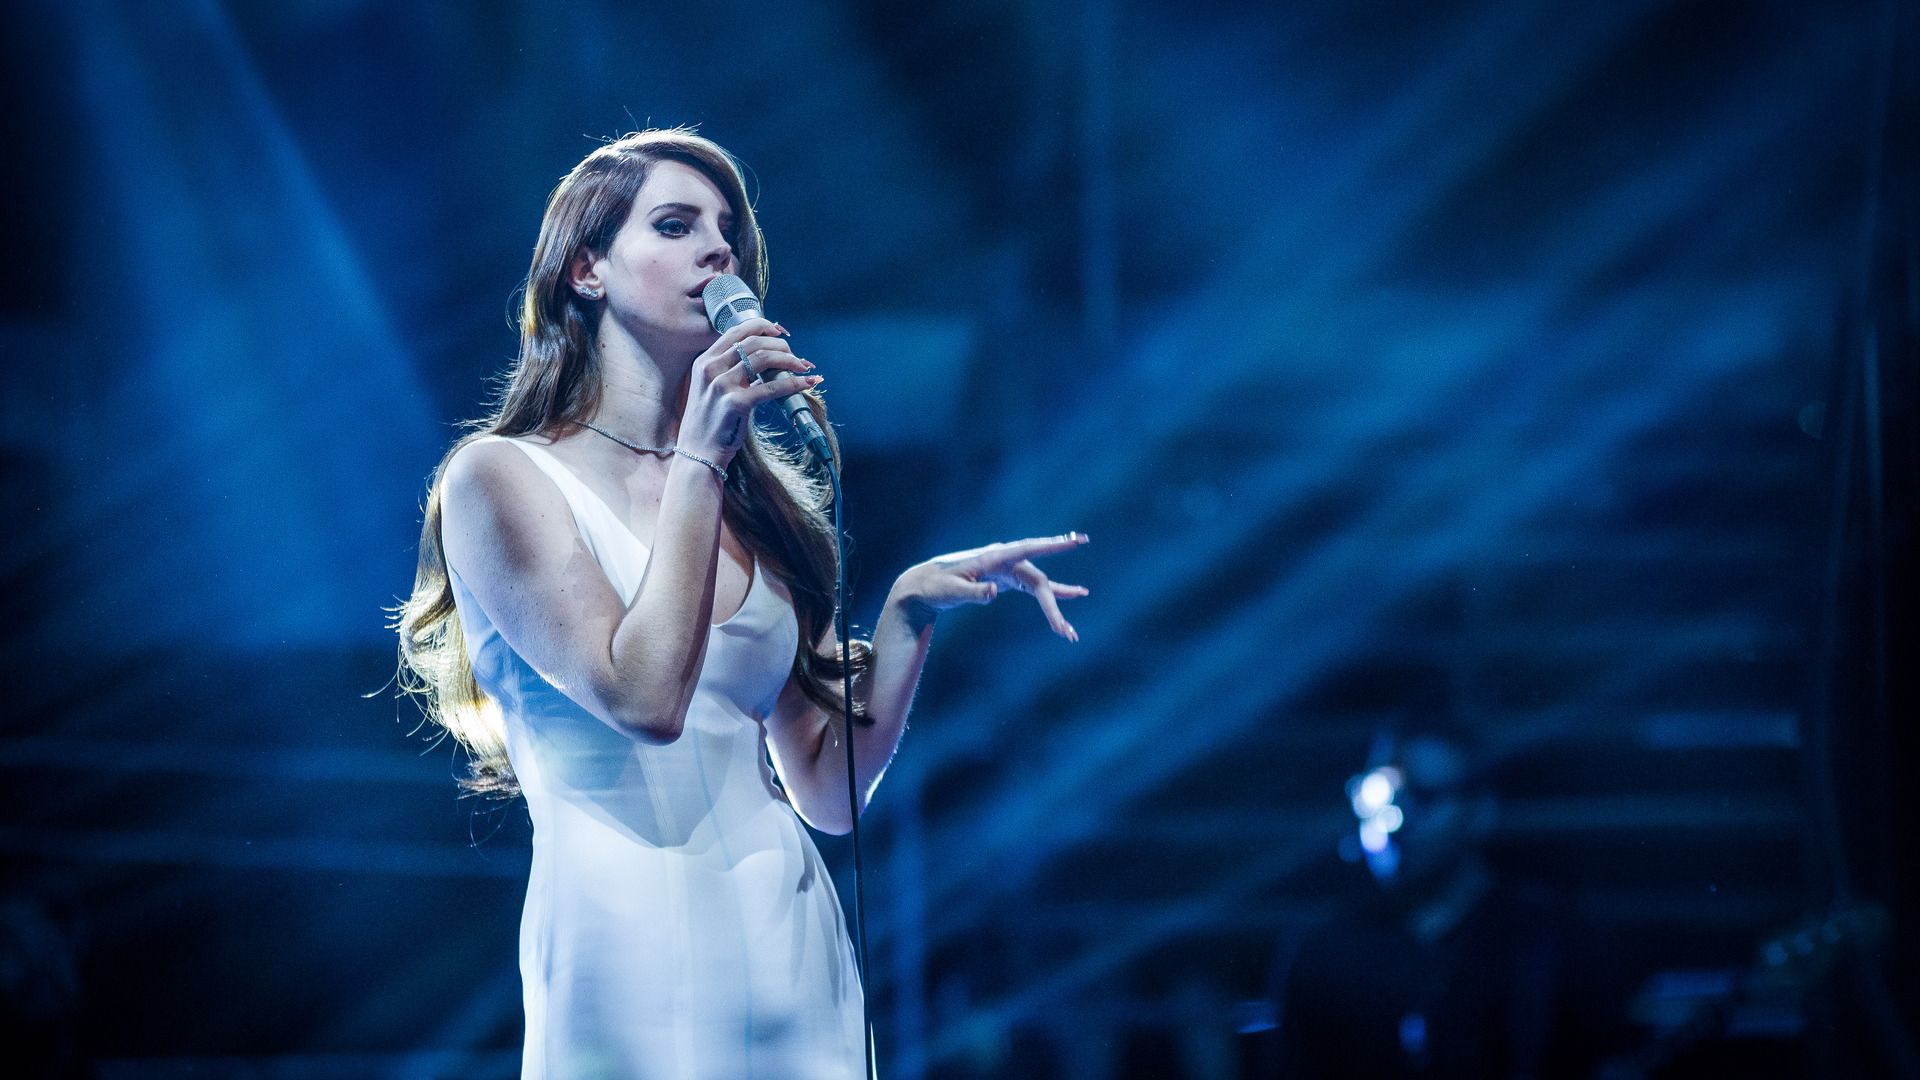 Lana Del Rey Live Laptop Full HD 1080P HD 4k Wallpaper, Image, Background, Photo and Picture